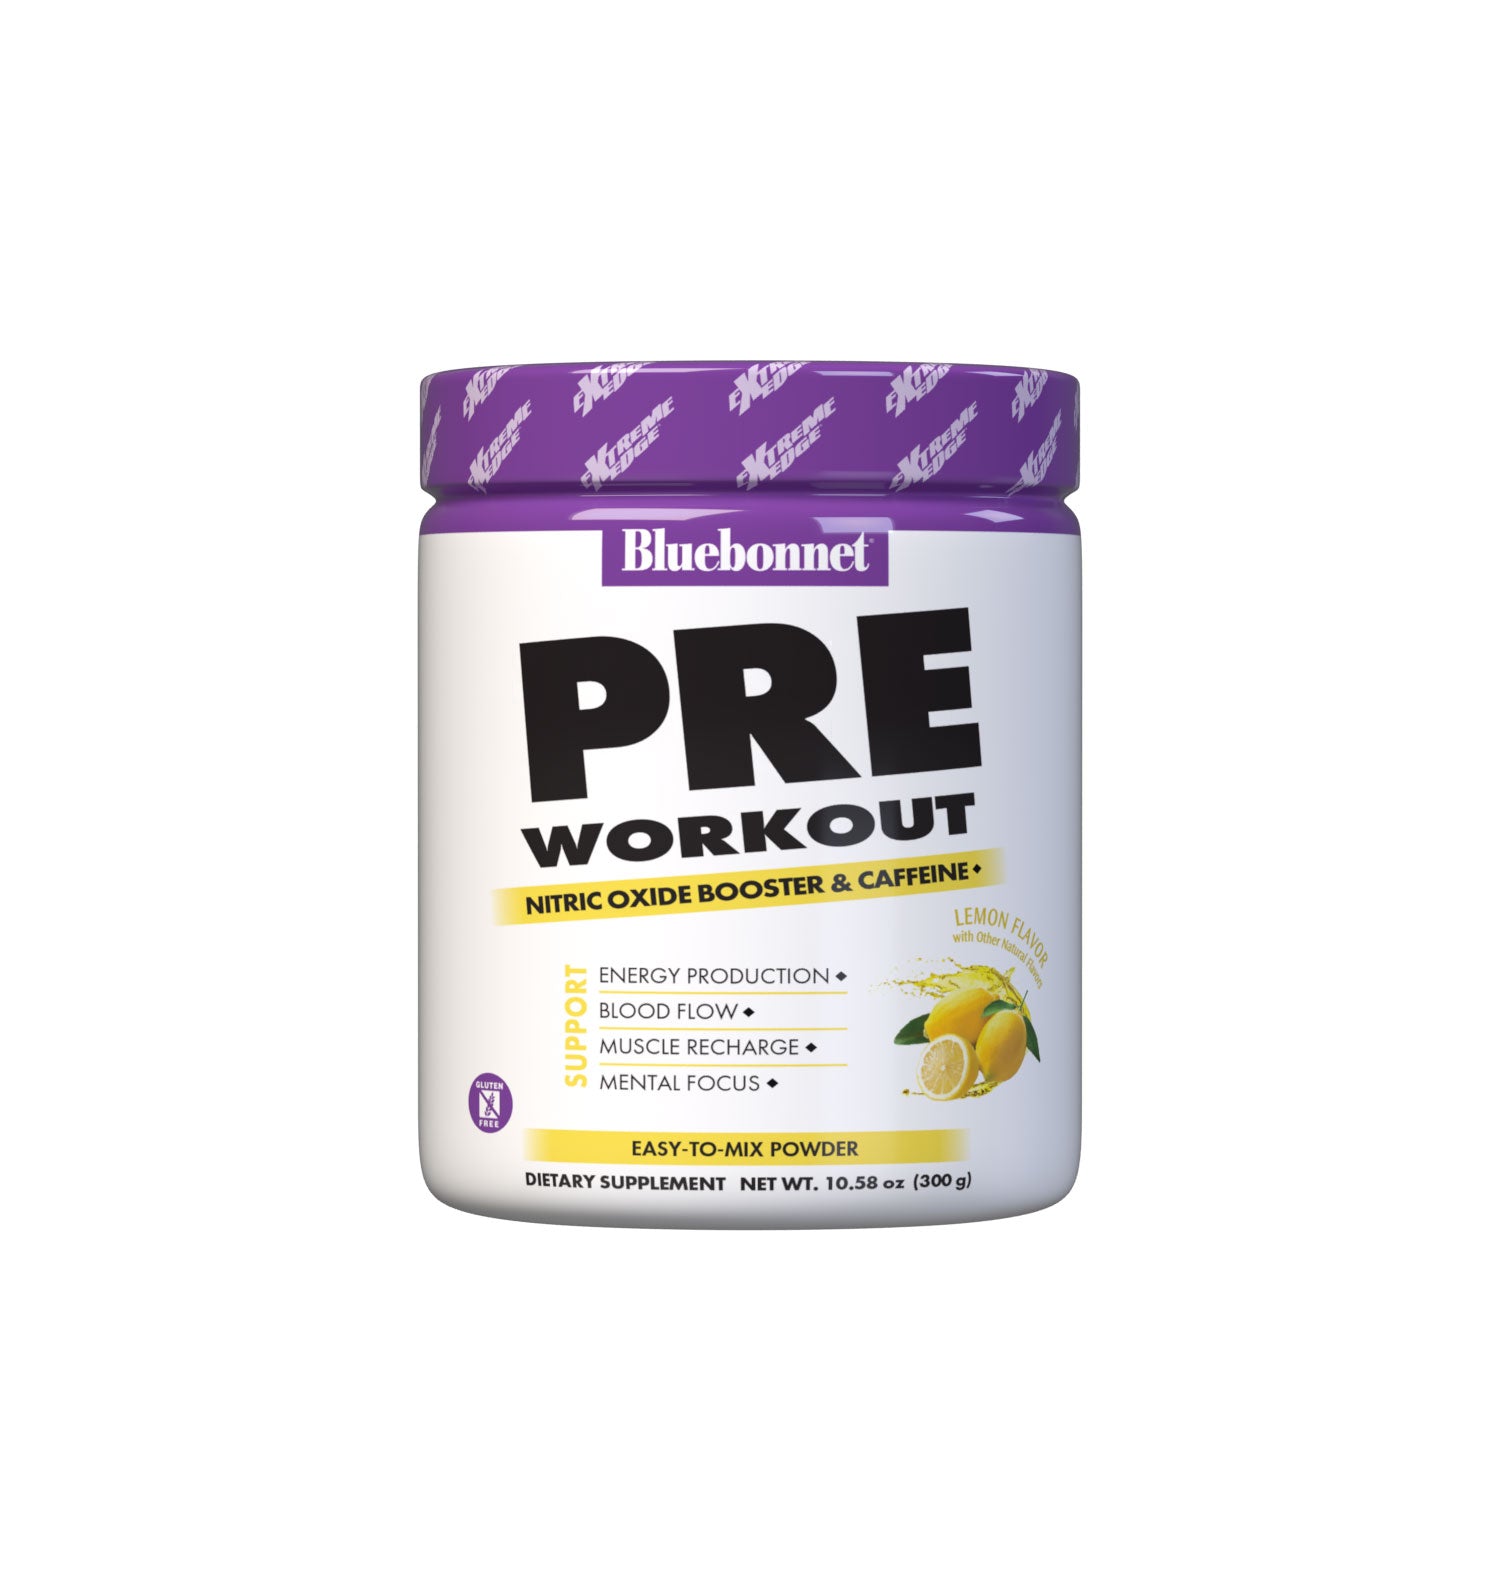 Bluebonnet's Lemon Flavored Pre Workout powder is designed to be one of the most comprehensive, muscle recharging formulas ever created. This triple-turbo, super-charged formula generates high energy, sharpens mental concentration, and increases nitric oxide (NO) levels for greater blood flow and intense muscle pumps. #size_0.66 lb